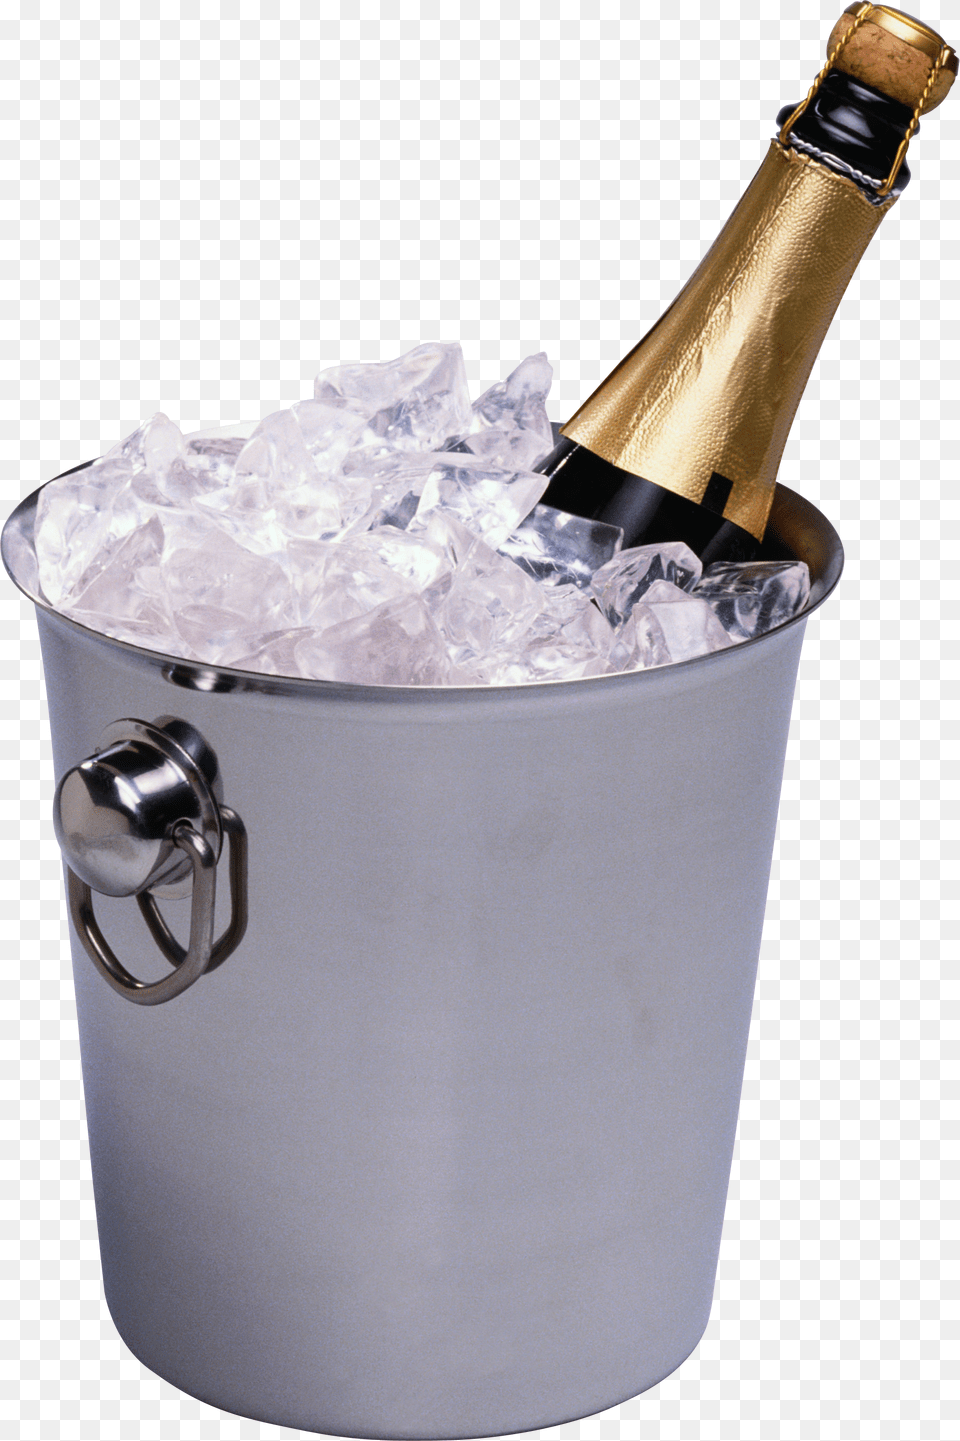 Champagne In Bottle Of Bubbly, Bucket, Shaker Free Png